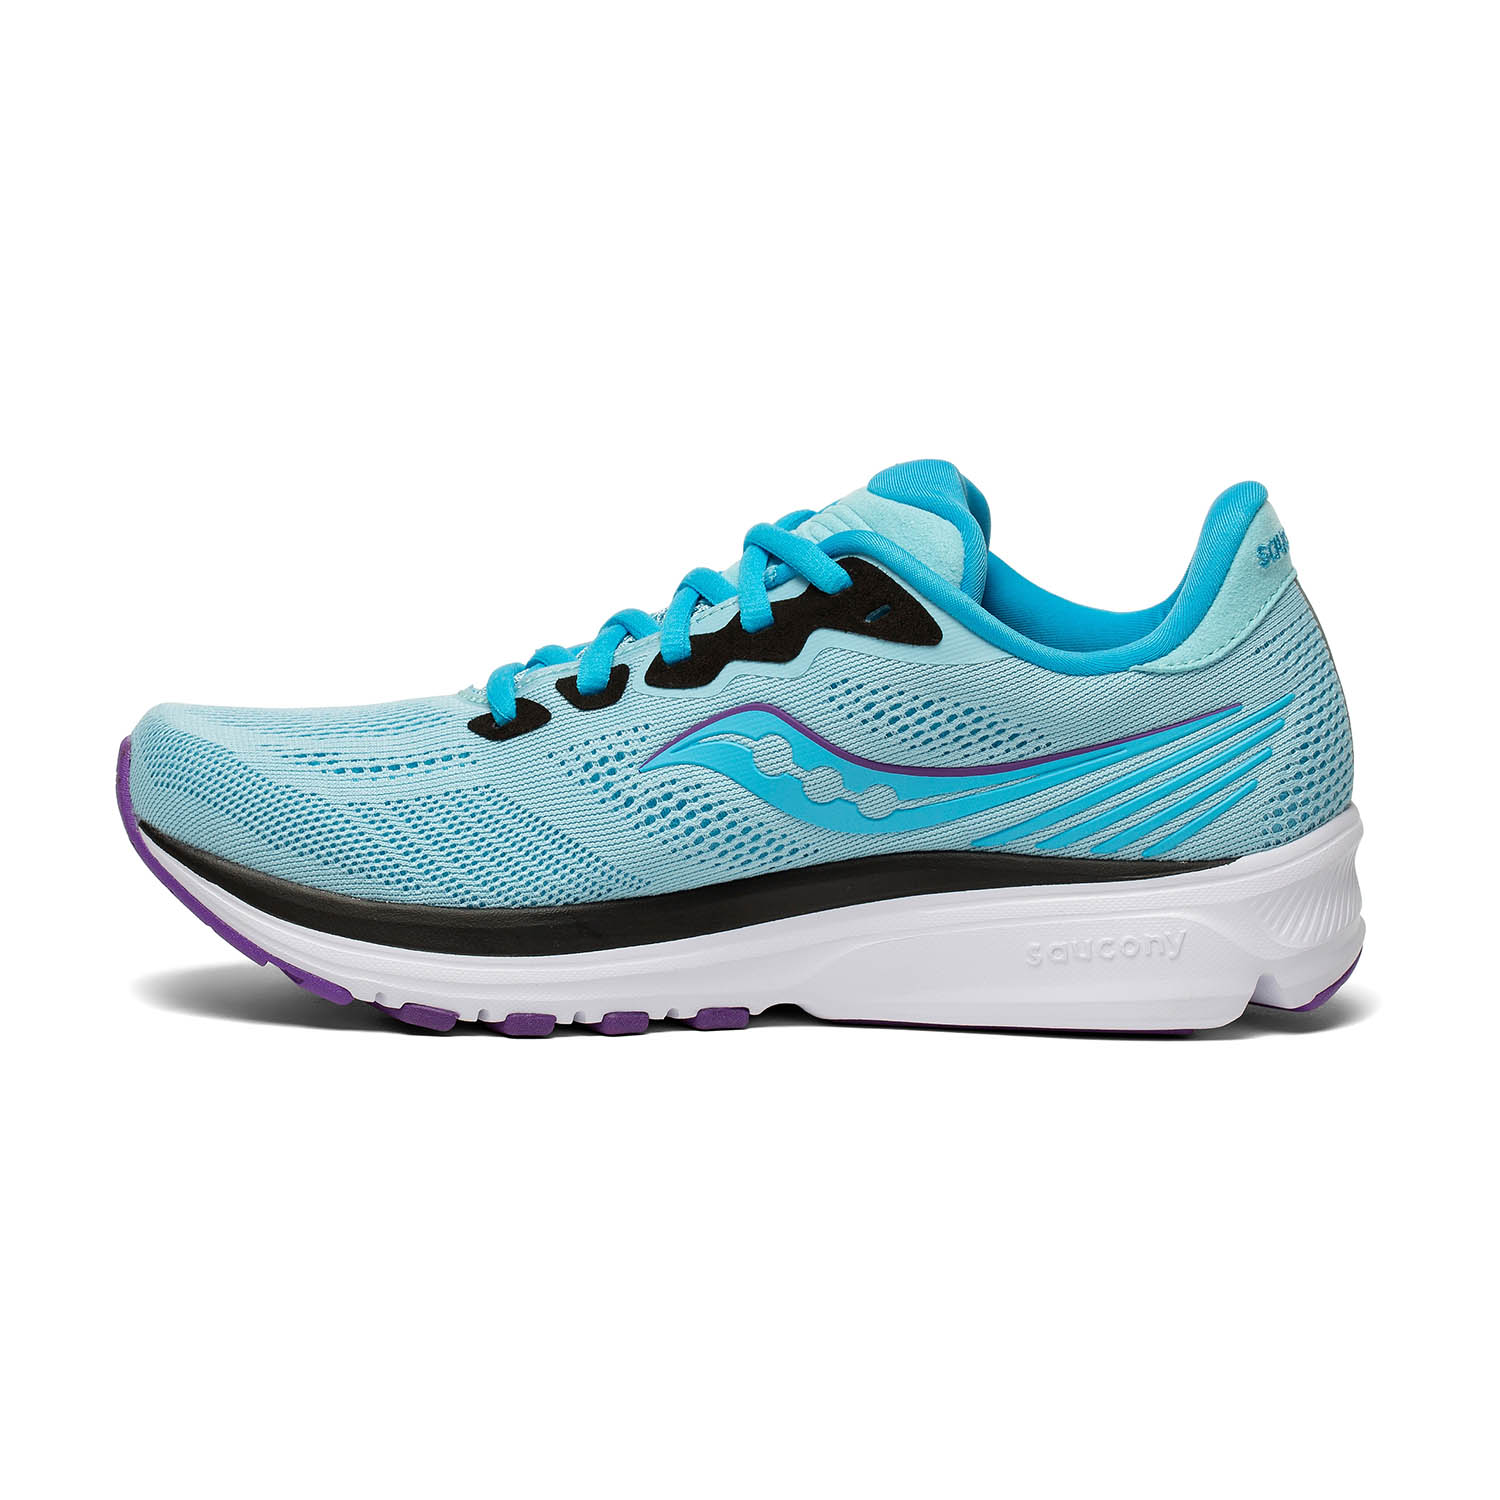 Saucony Ride 14 Women's Running Shoes - Powder/Concord